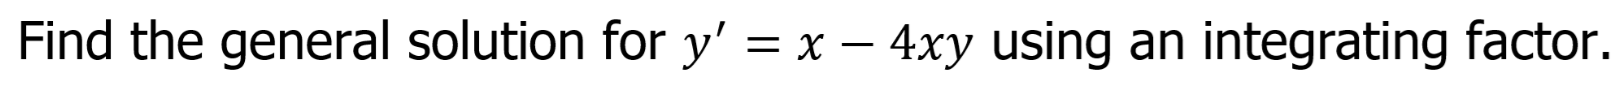 Find the general solution for y' = x – 4xy using an integrating factor.
